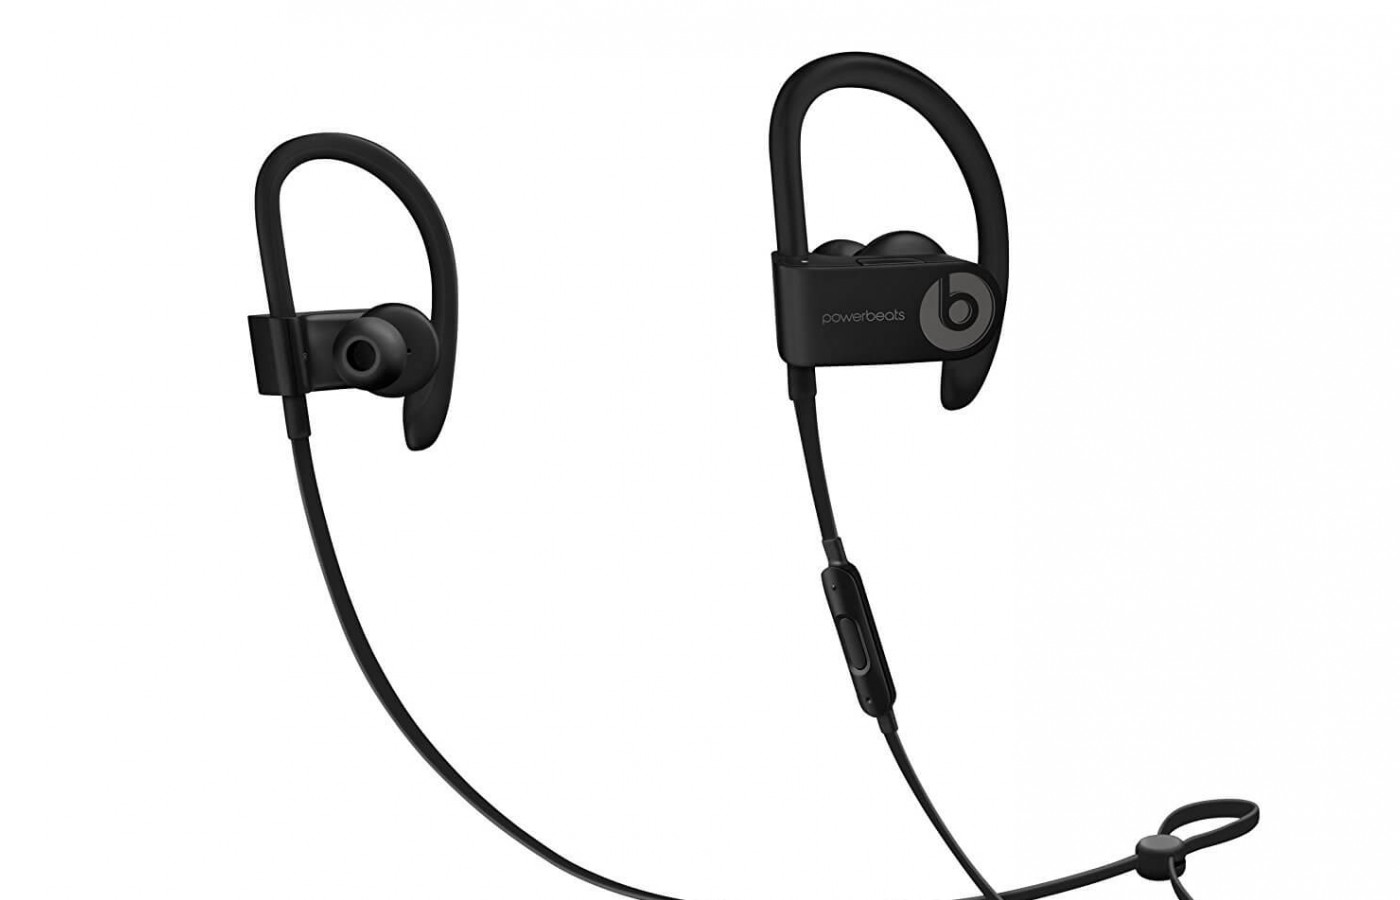 A full-size view of the Powerbeats 3.